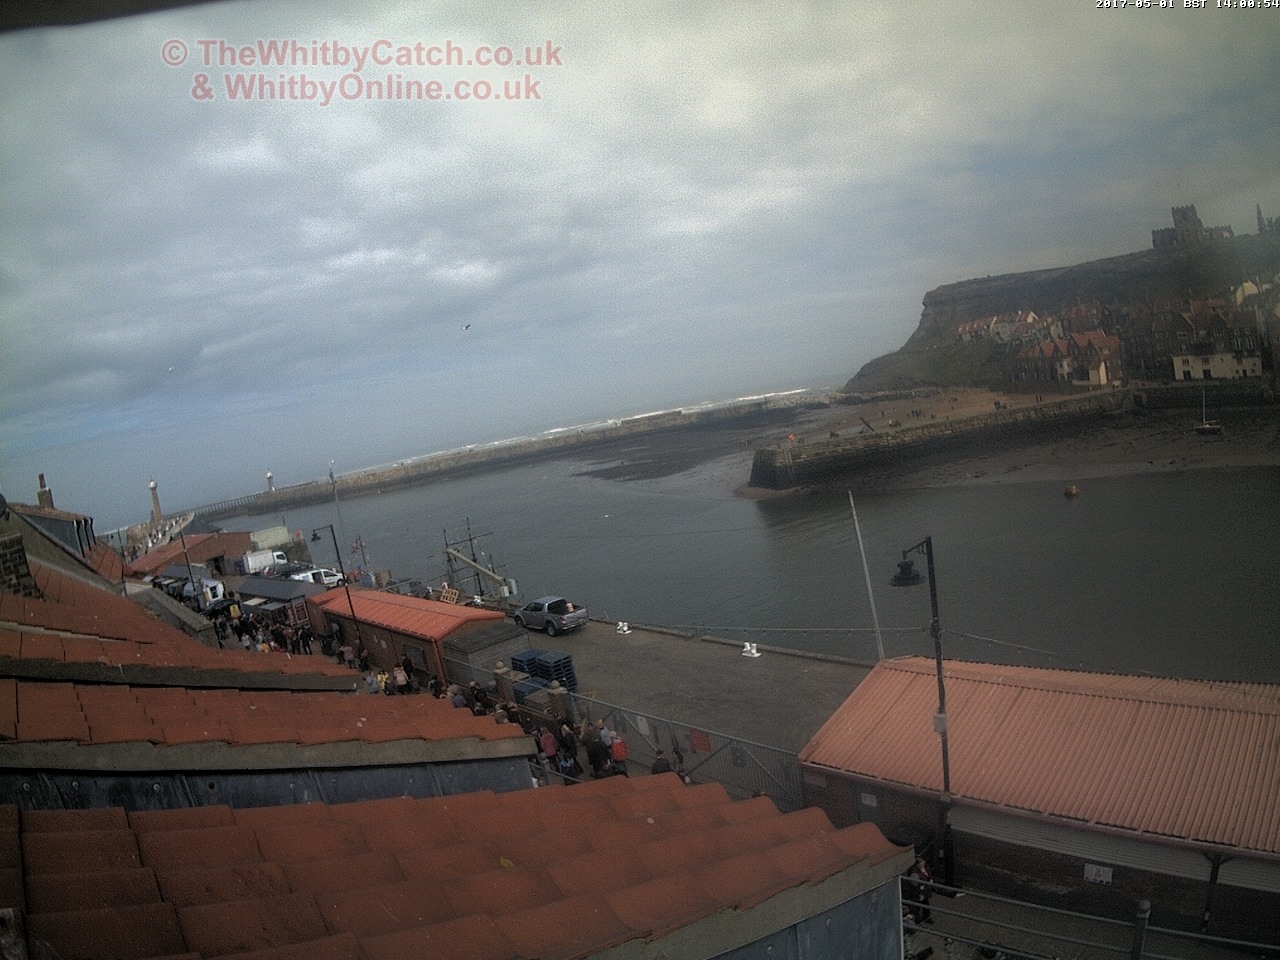 Whitby Mon 1st May 2017 14:01.